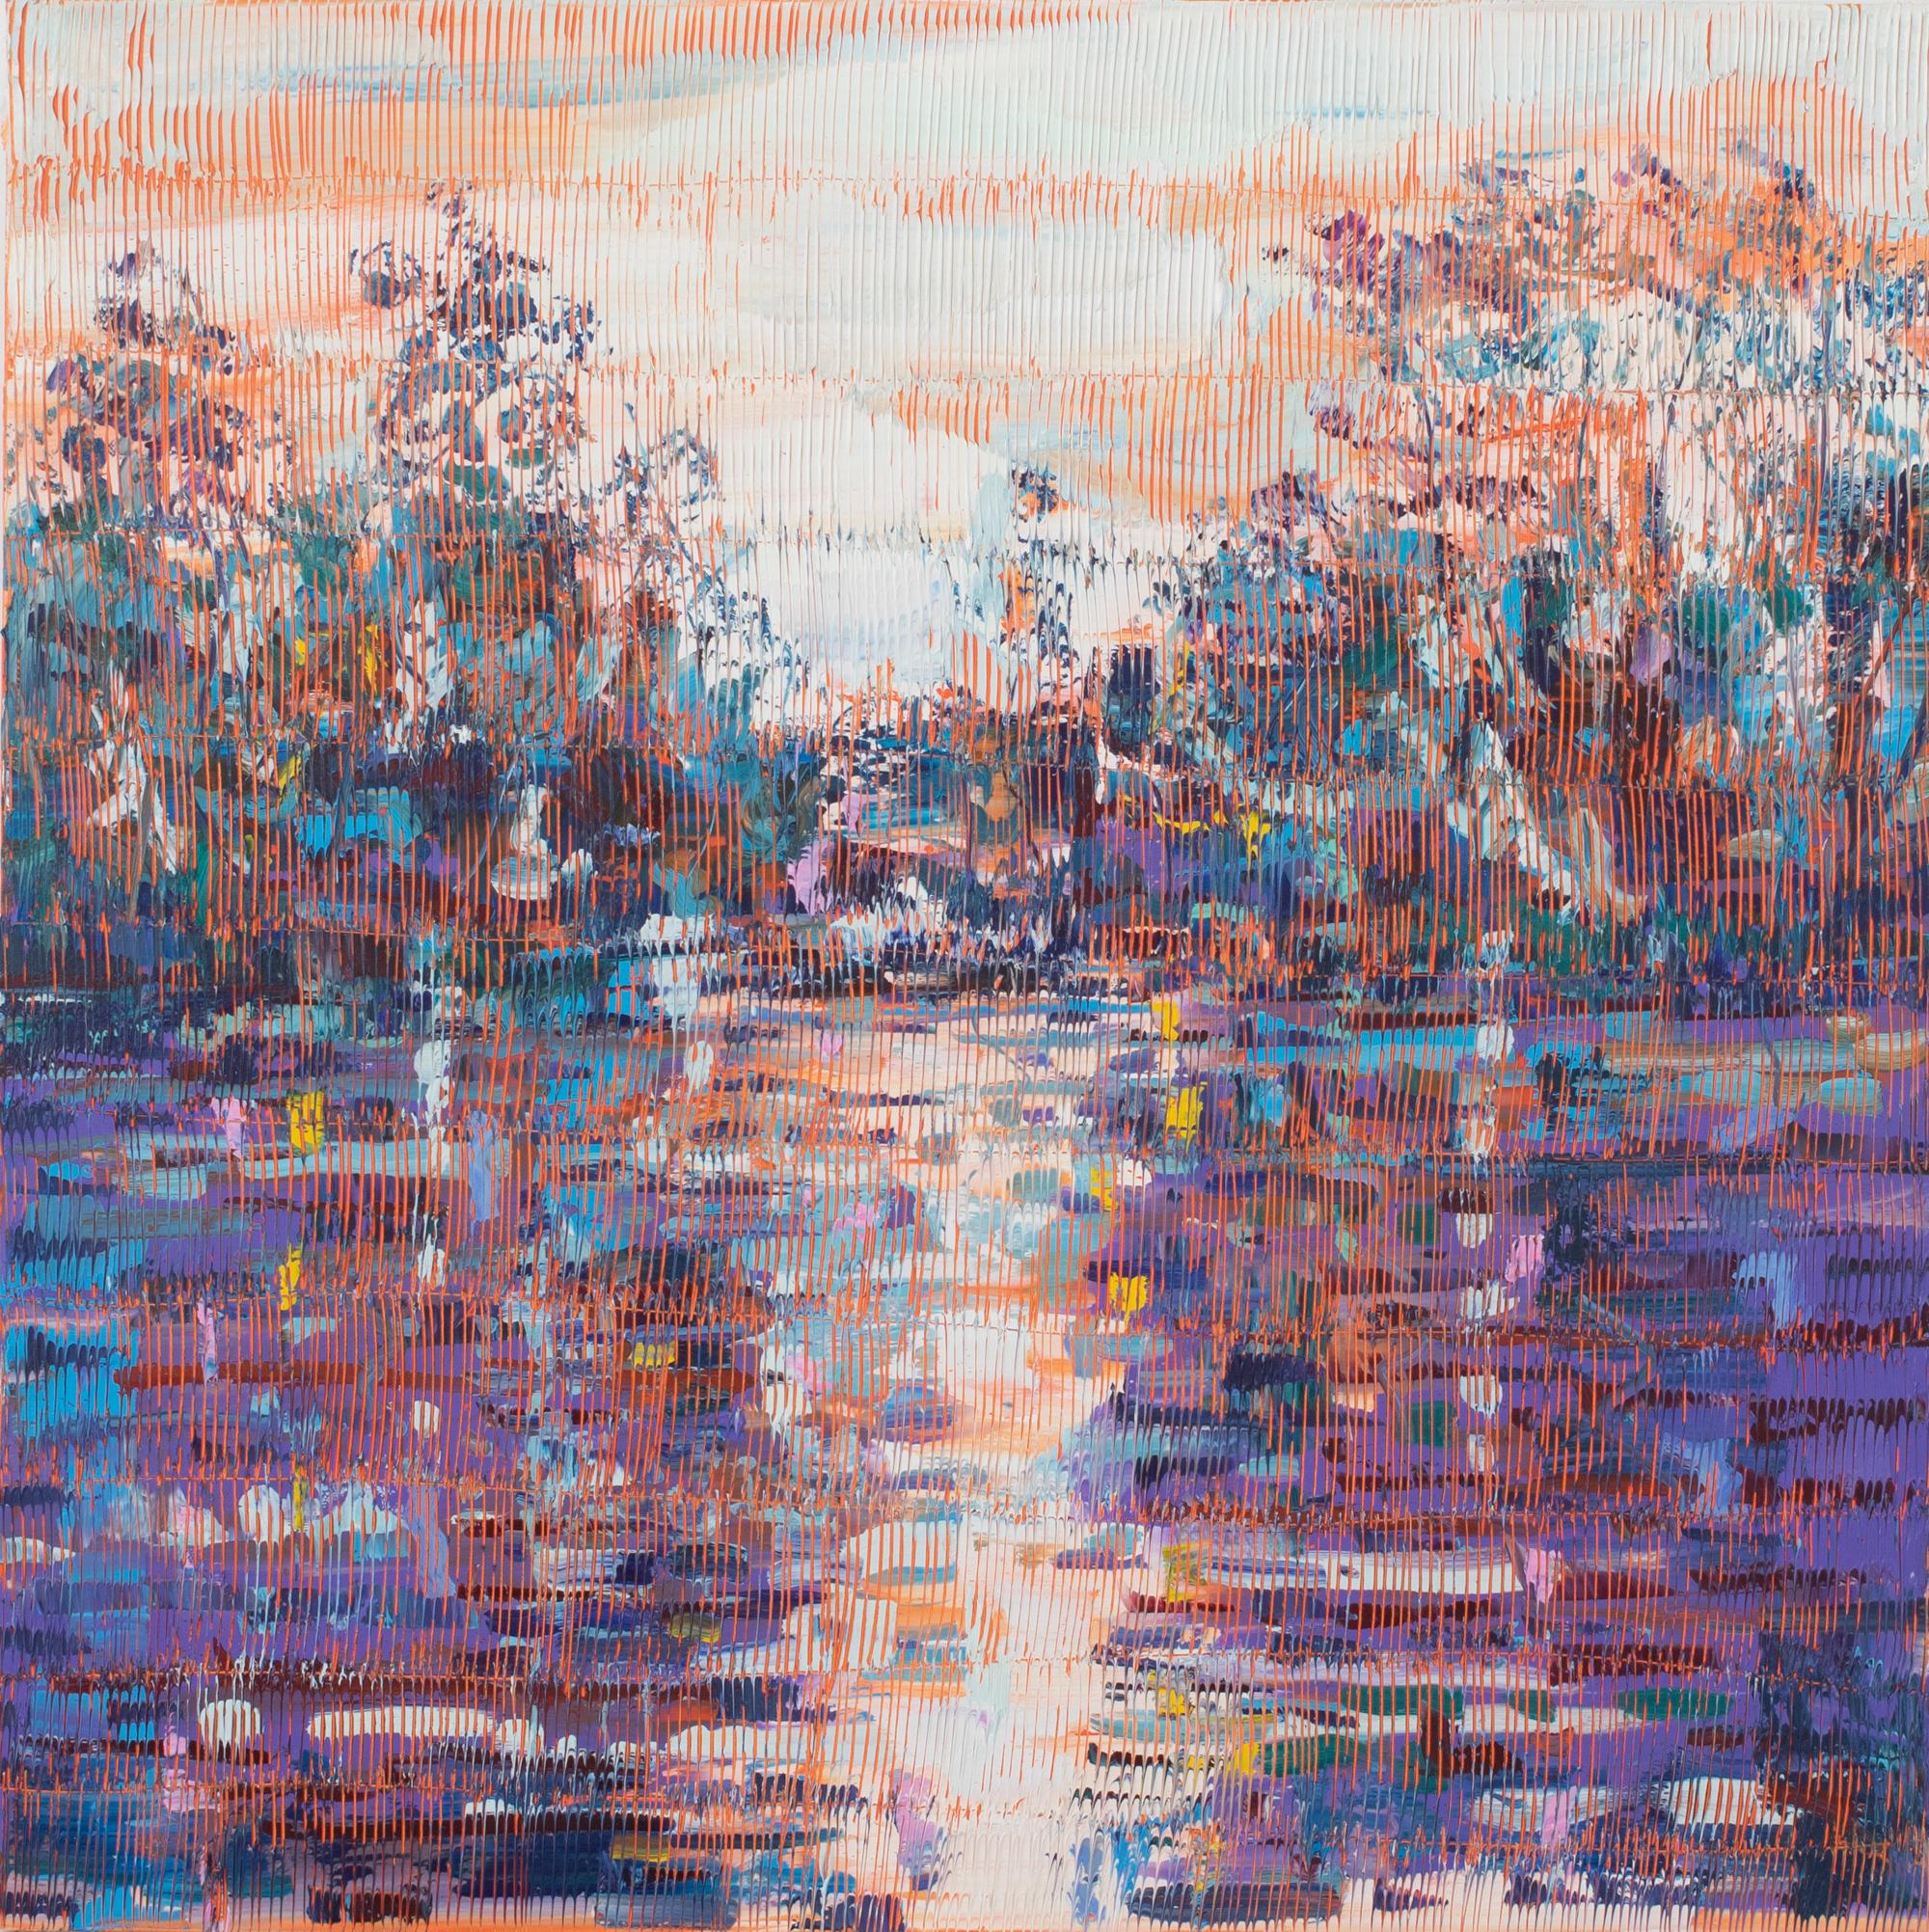 Hunt Slonem "Bayou La Fouche"
Pink, orange, purple, and blue bayou landscape with scoring

Oil on Canvas

Unframed: 48 x 48 in.

Hunt Slonem is a well-renowned American artist is known for his neo-expressionist paintings of butterflies, rabbits, and